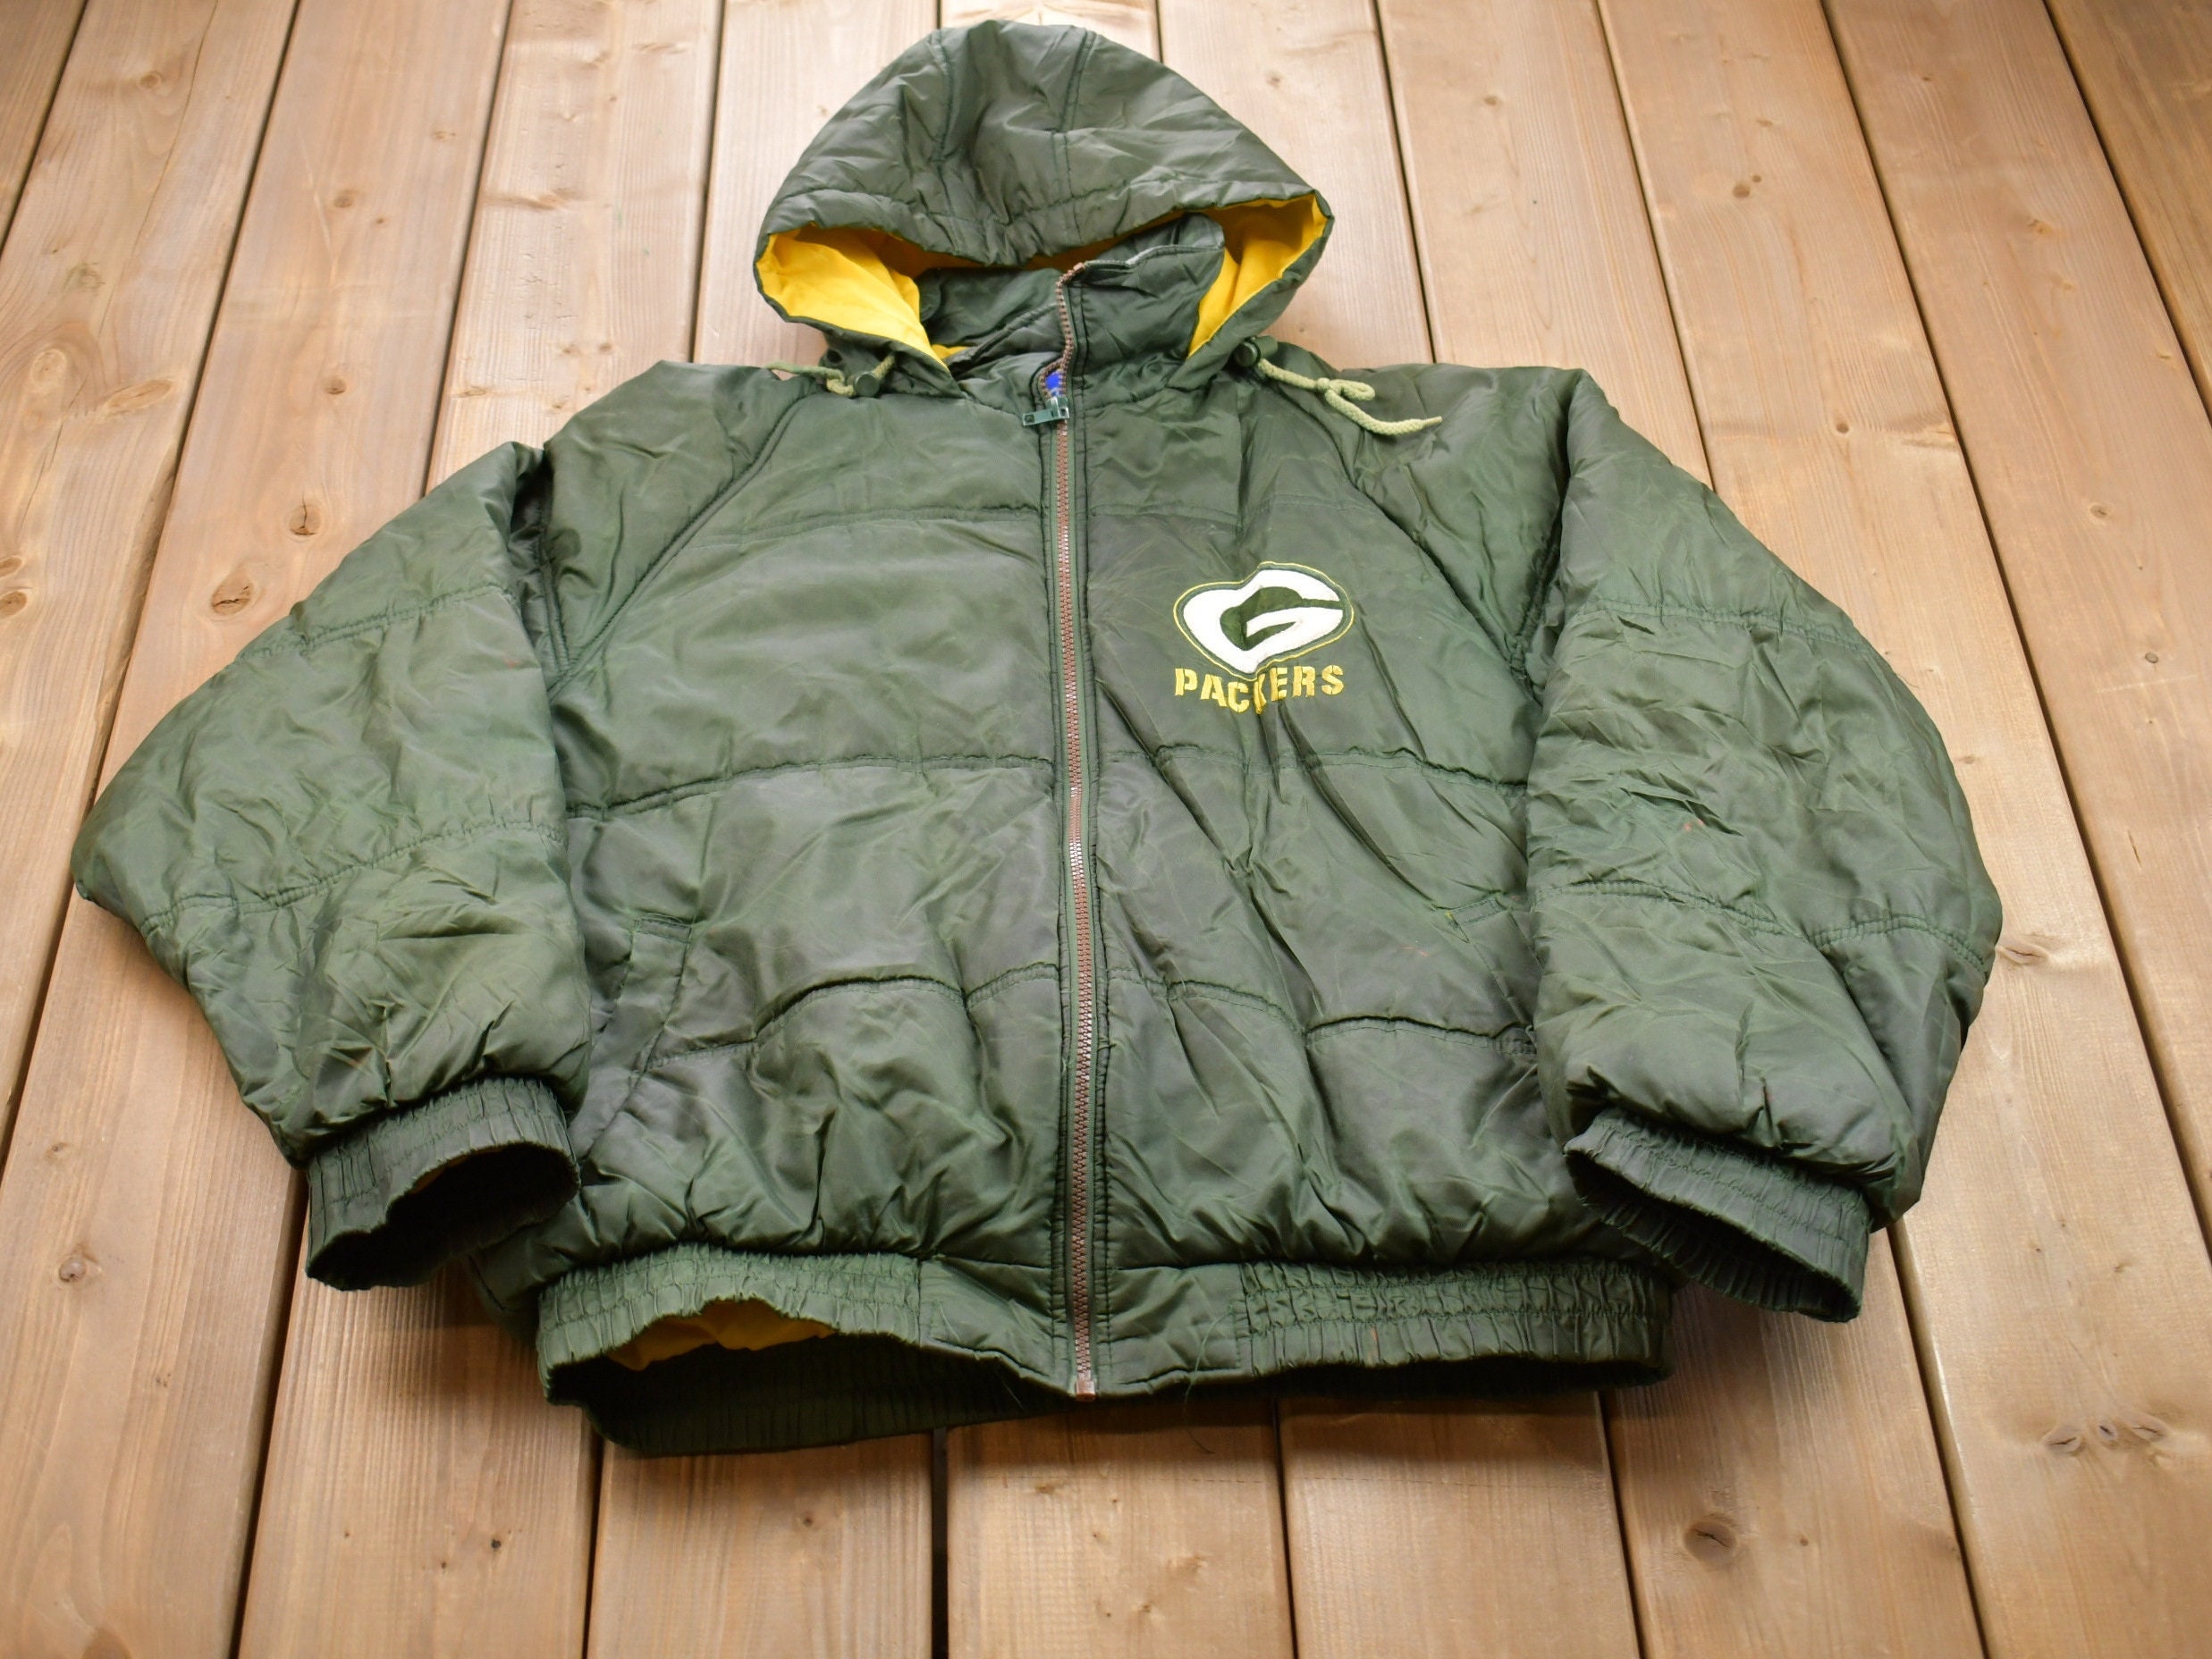 Vintage 1990s Green Bay Packers Game Day NFL Puffer Jacket / Goose Down Fill / Vintage Bubble Jacket / Winter / Streetwear / 90s NFL